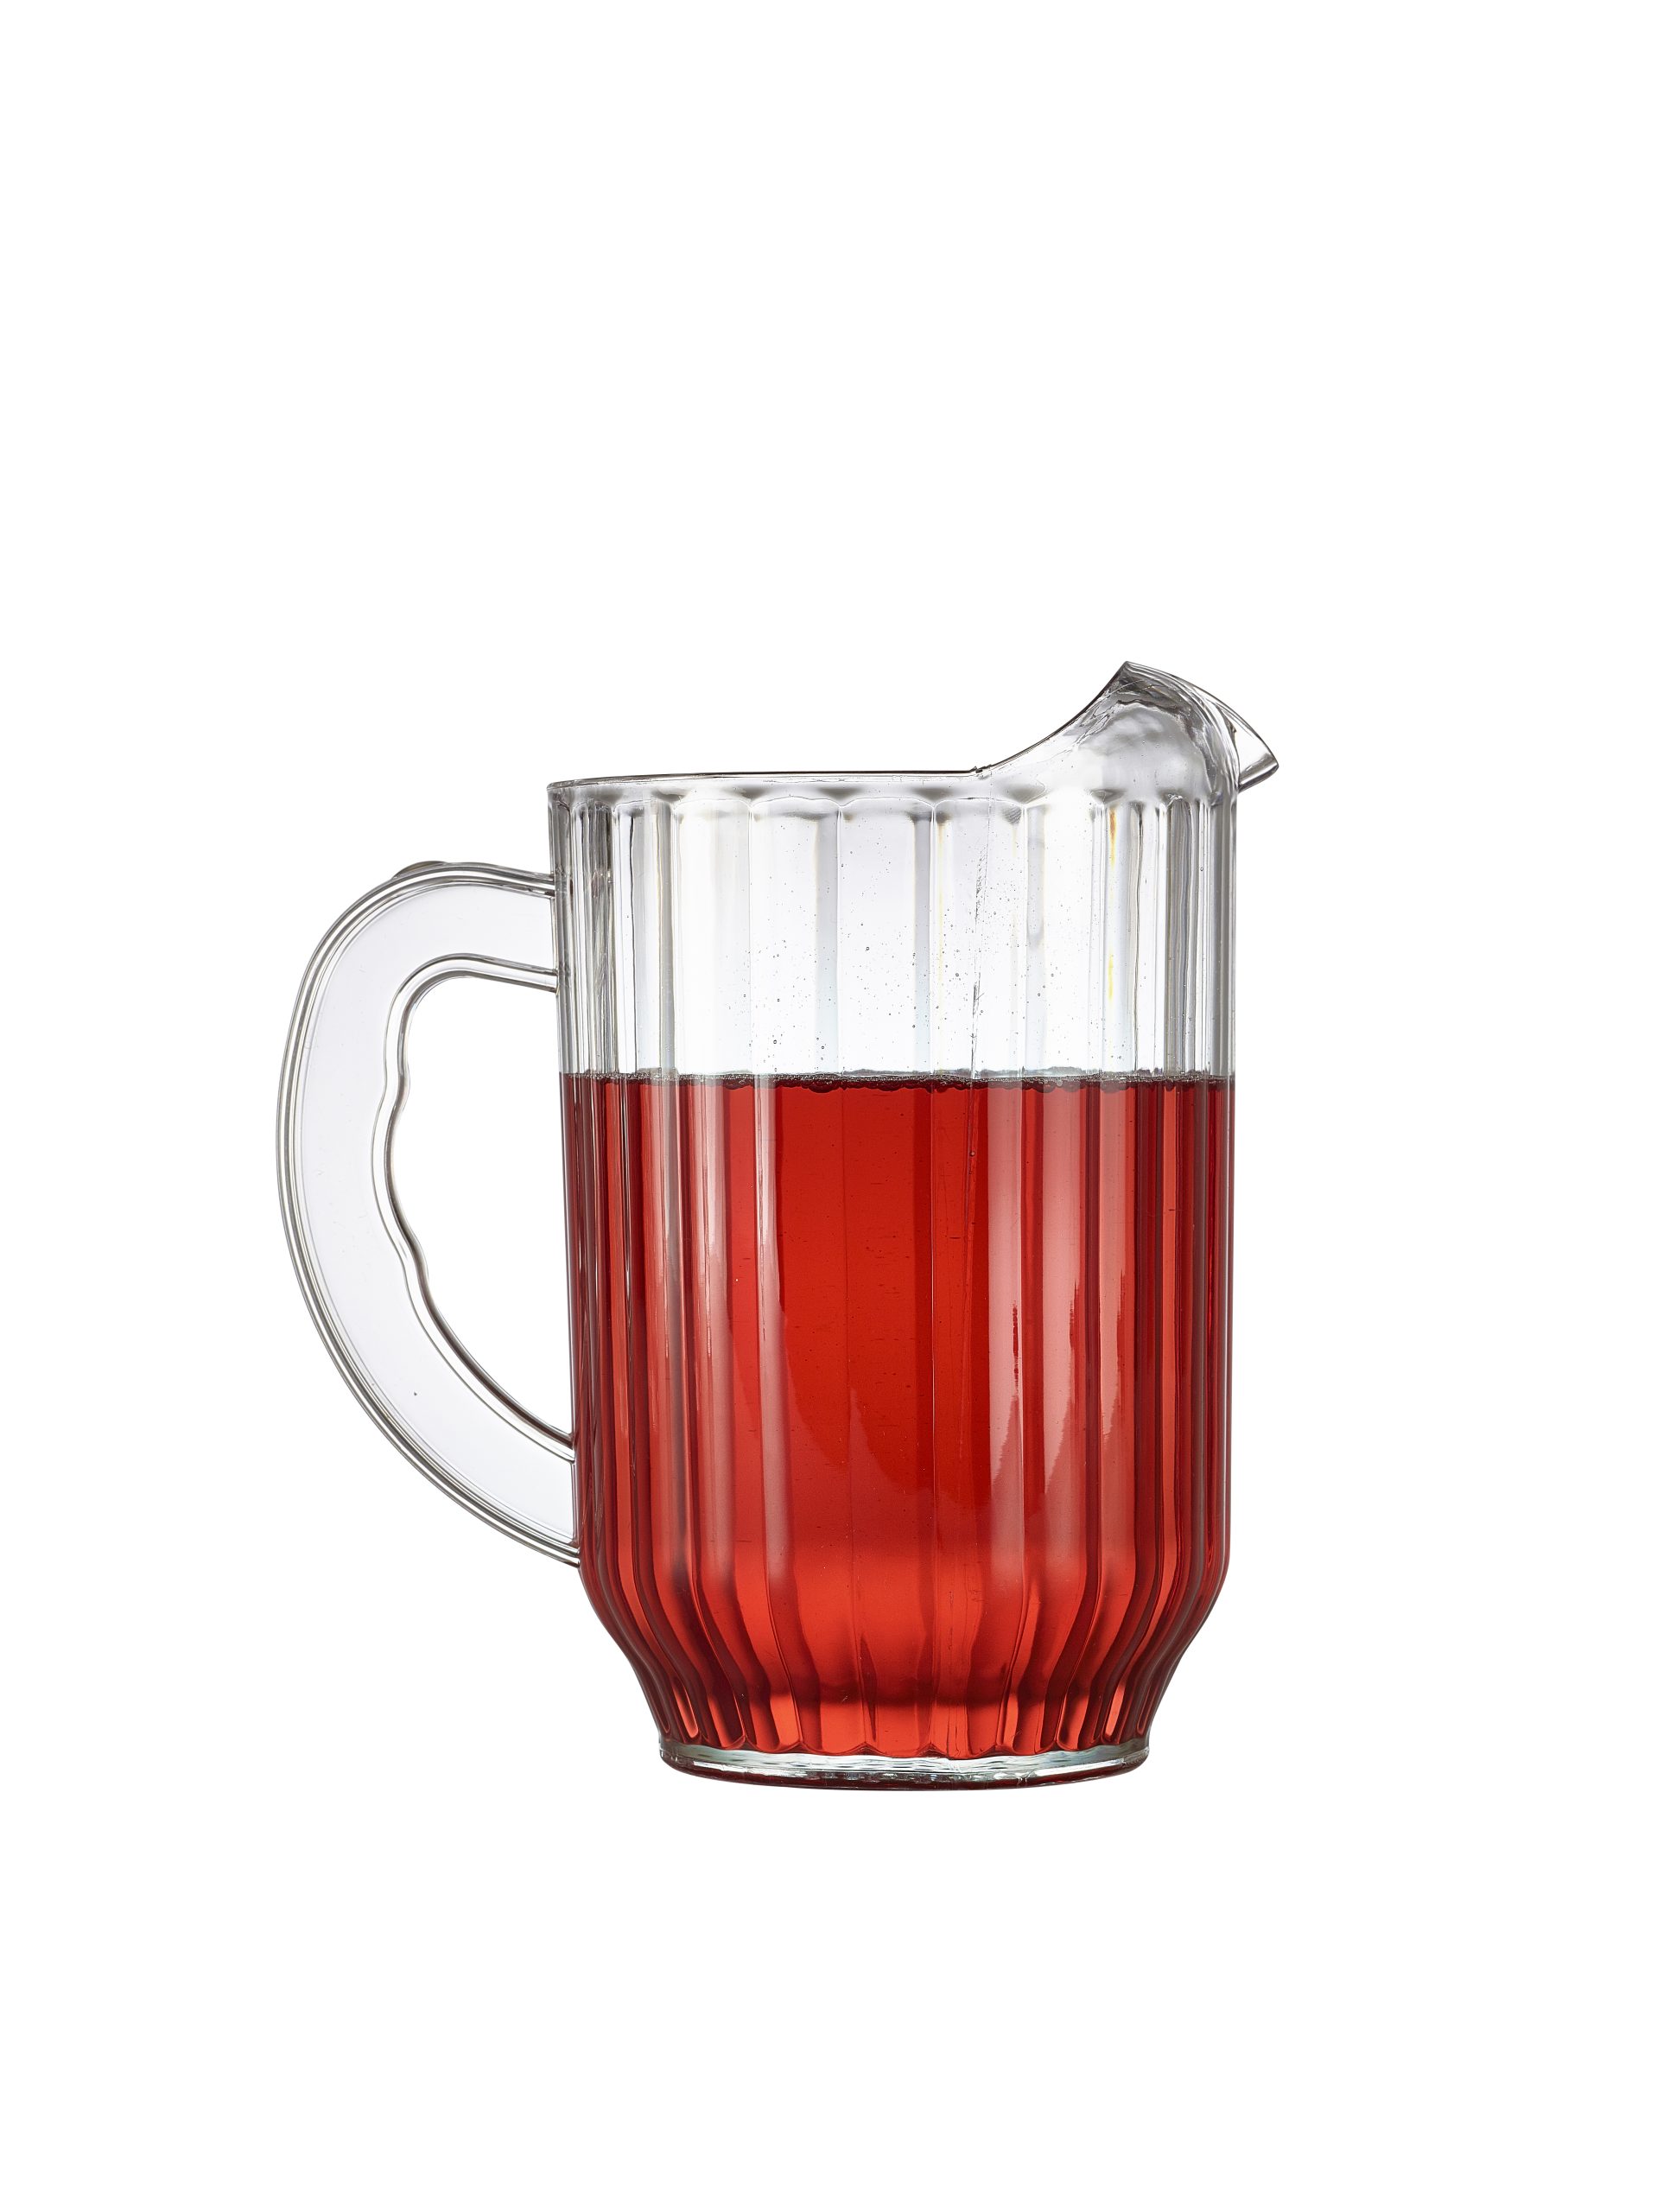 Polycarbonate Pitcher filled with juice